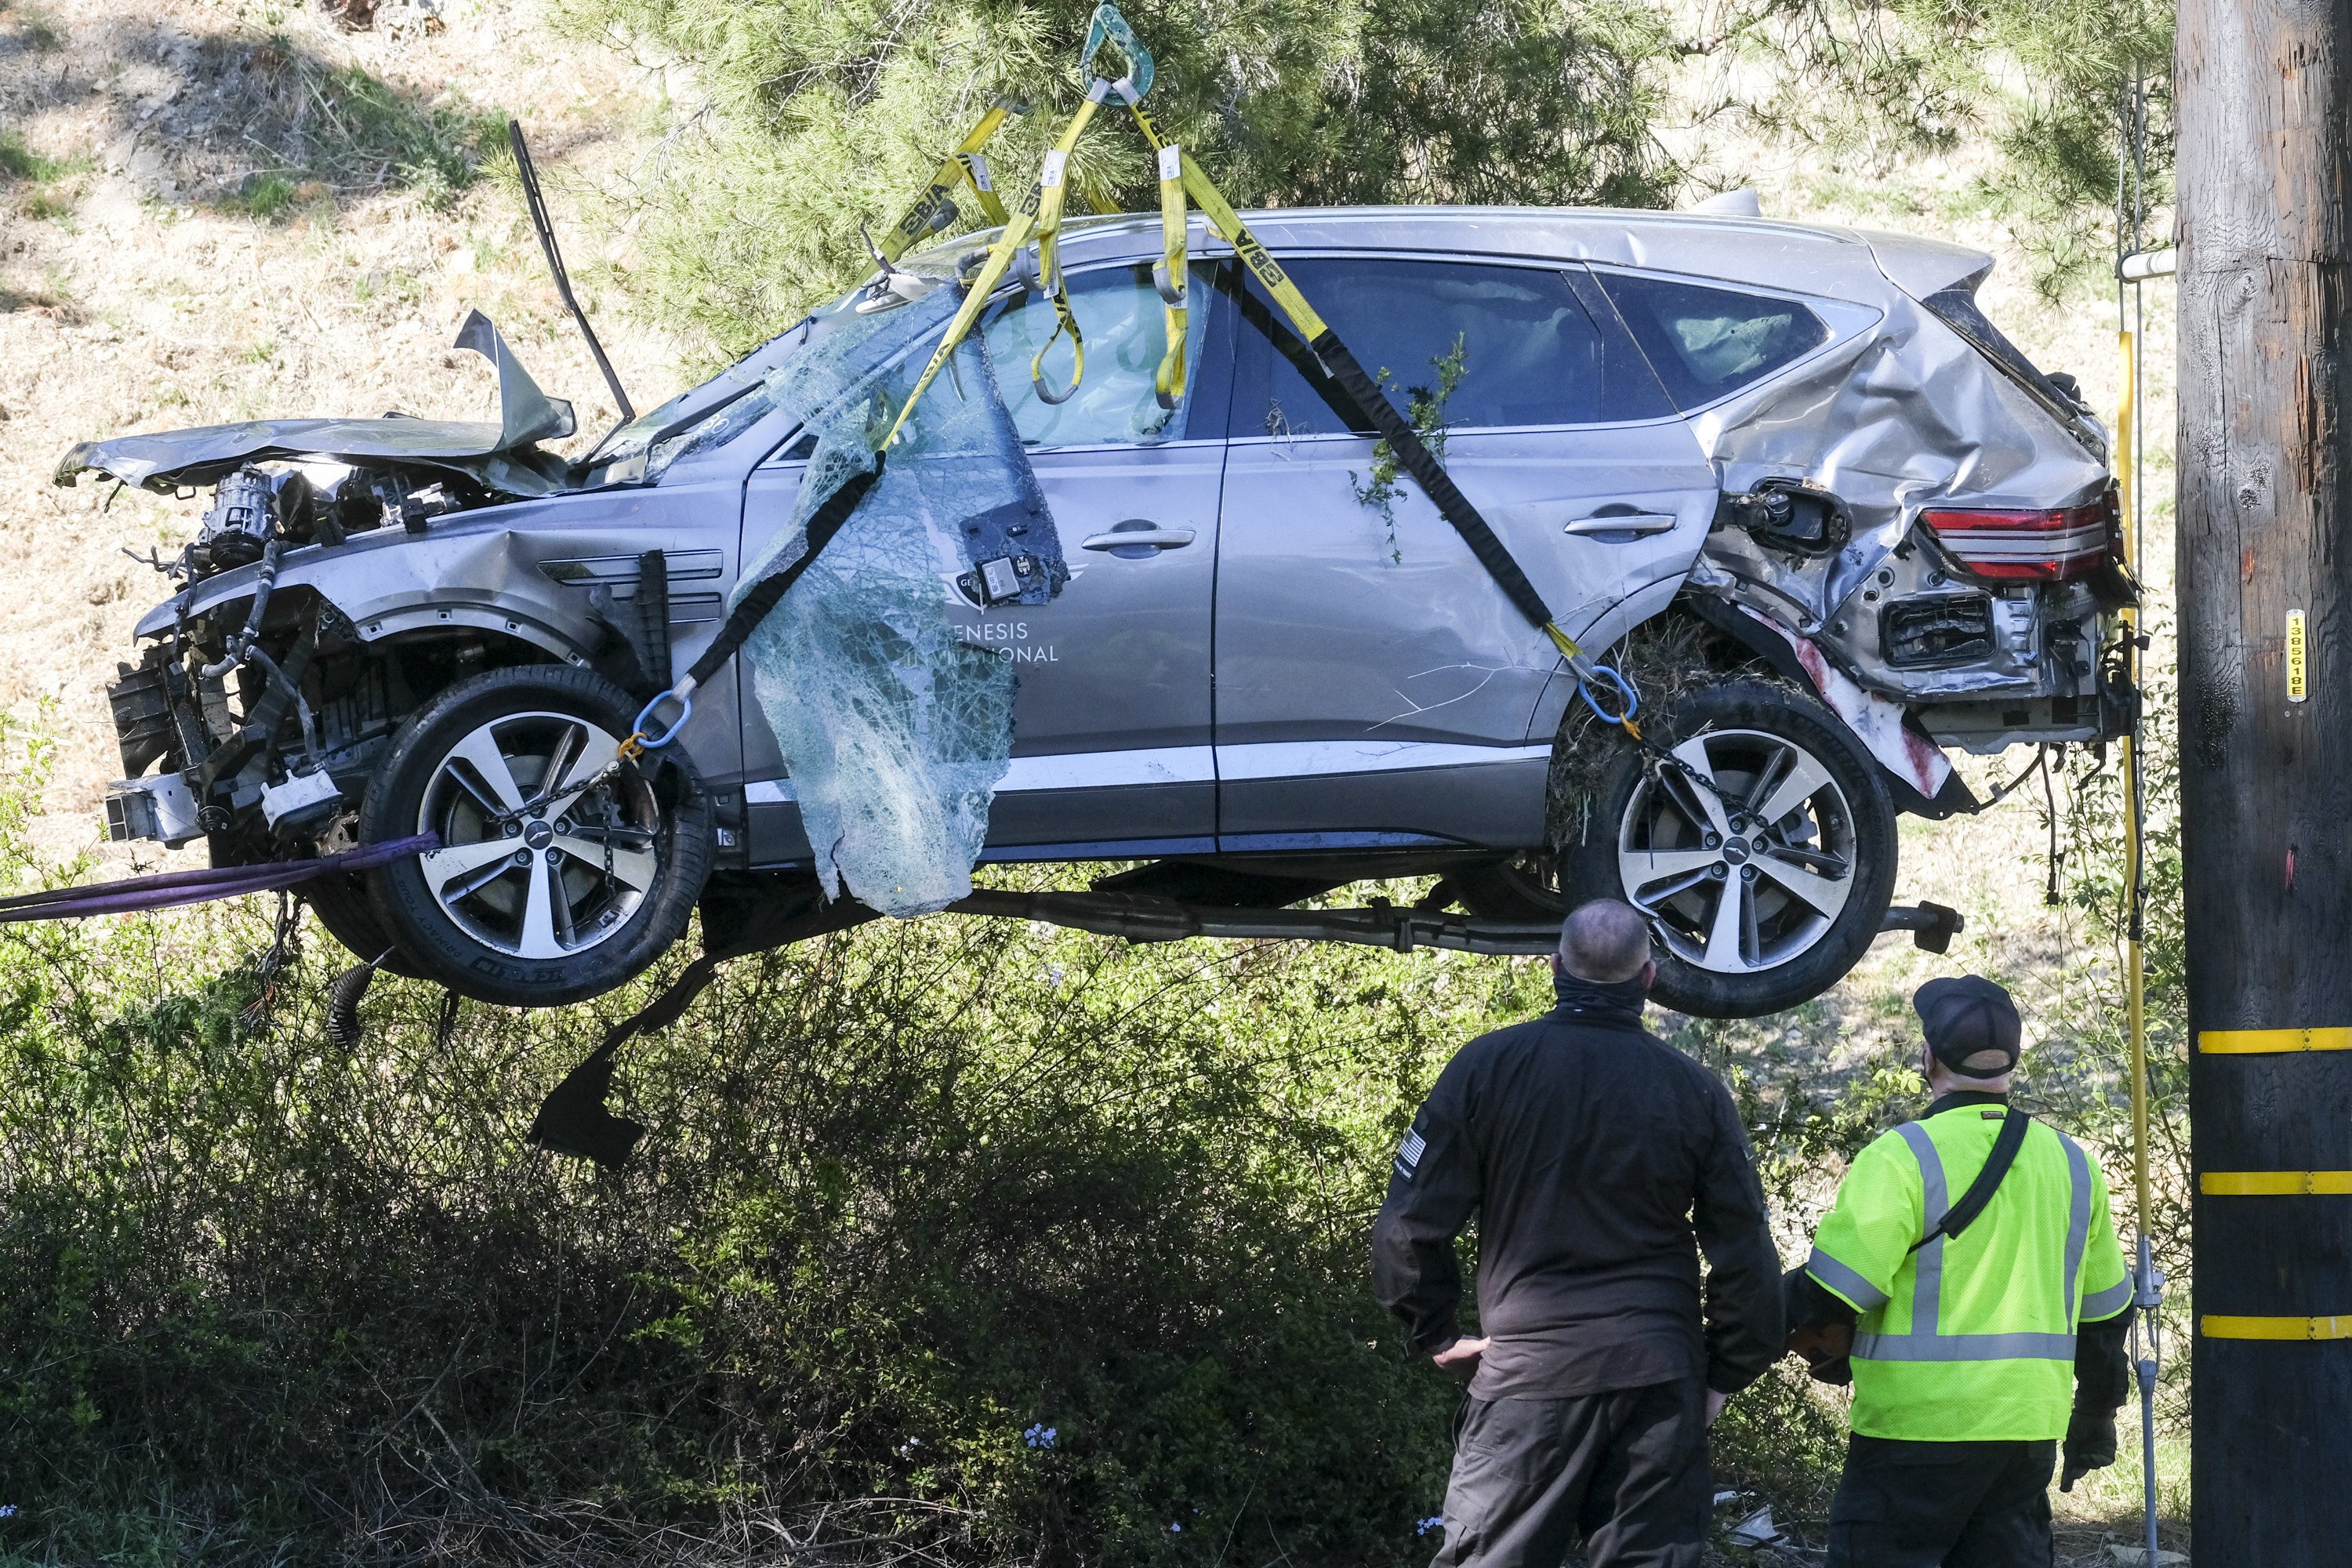 A crane is used to lift a vehicle following a rollover accident involving golfer Tiger Woods in the Los Angeles area in February. Photo: AP